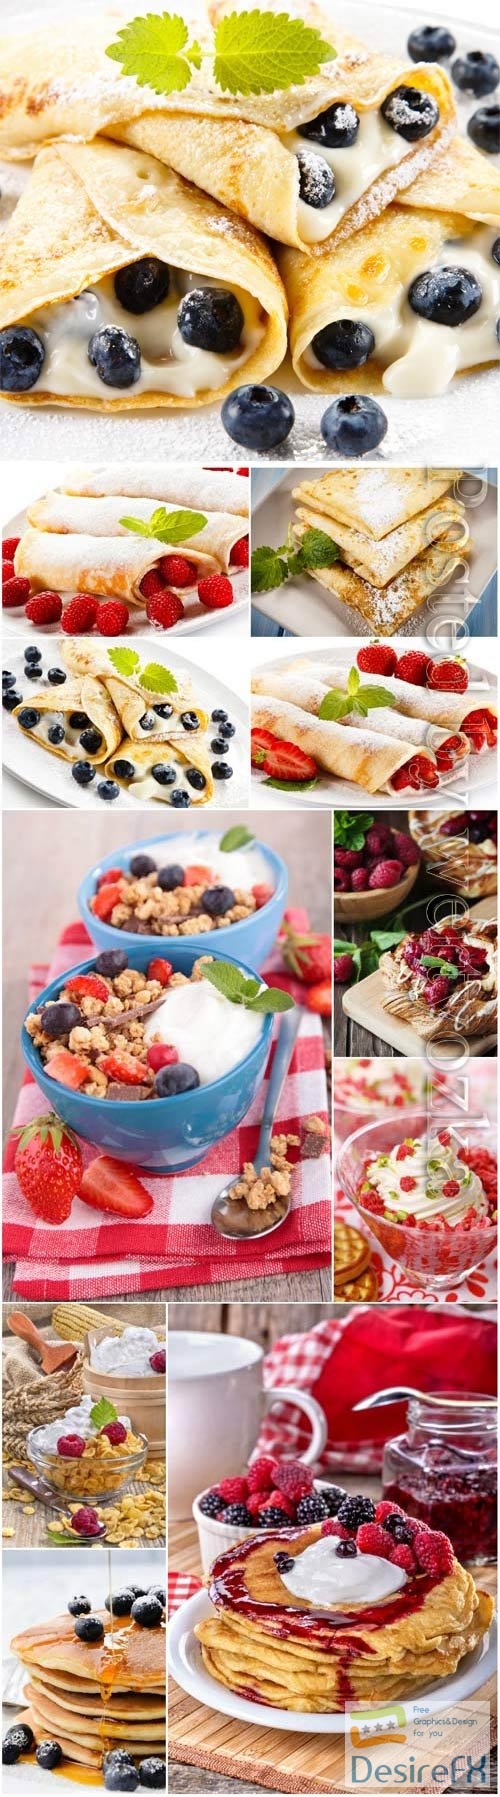 Pancakes with fruits and berries, healthy breakfast stock photo